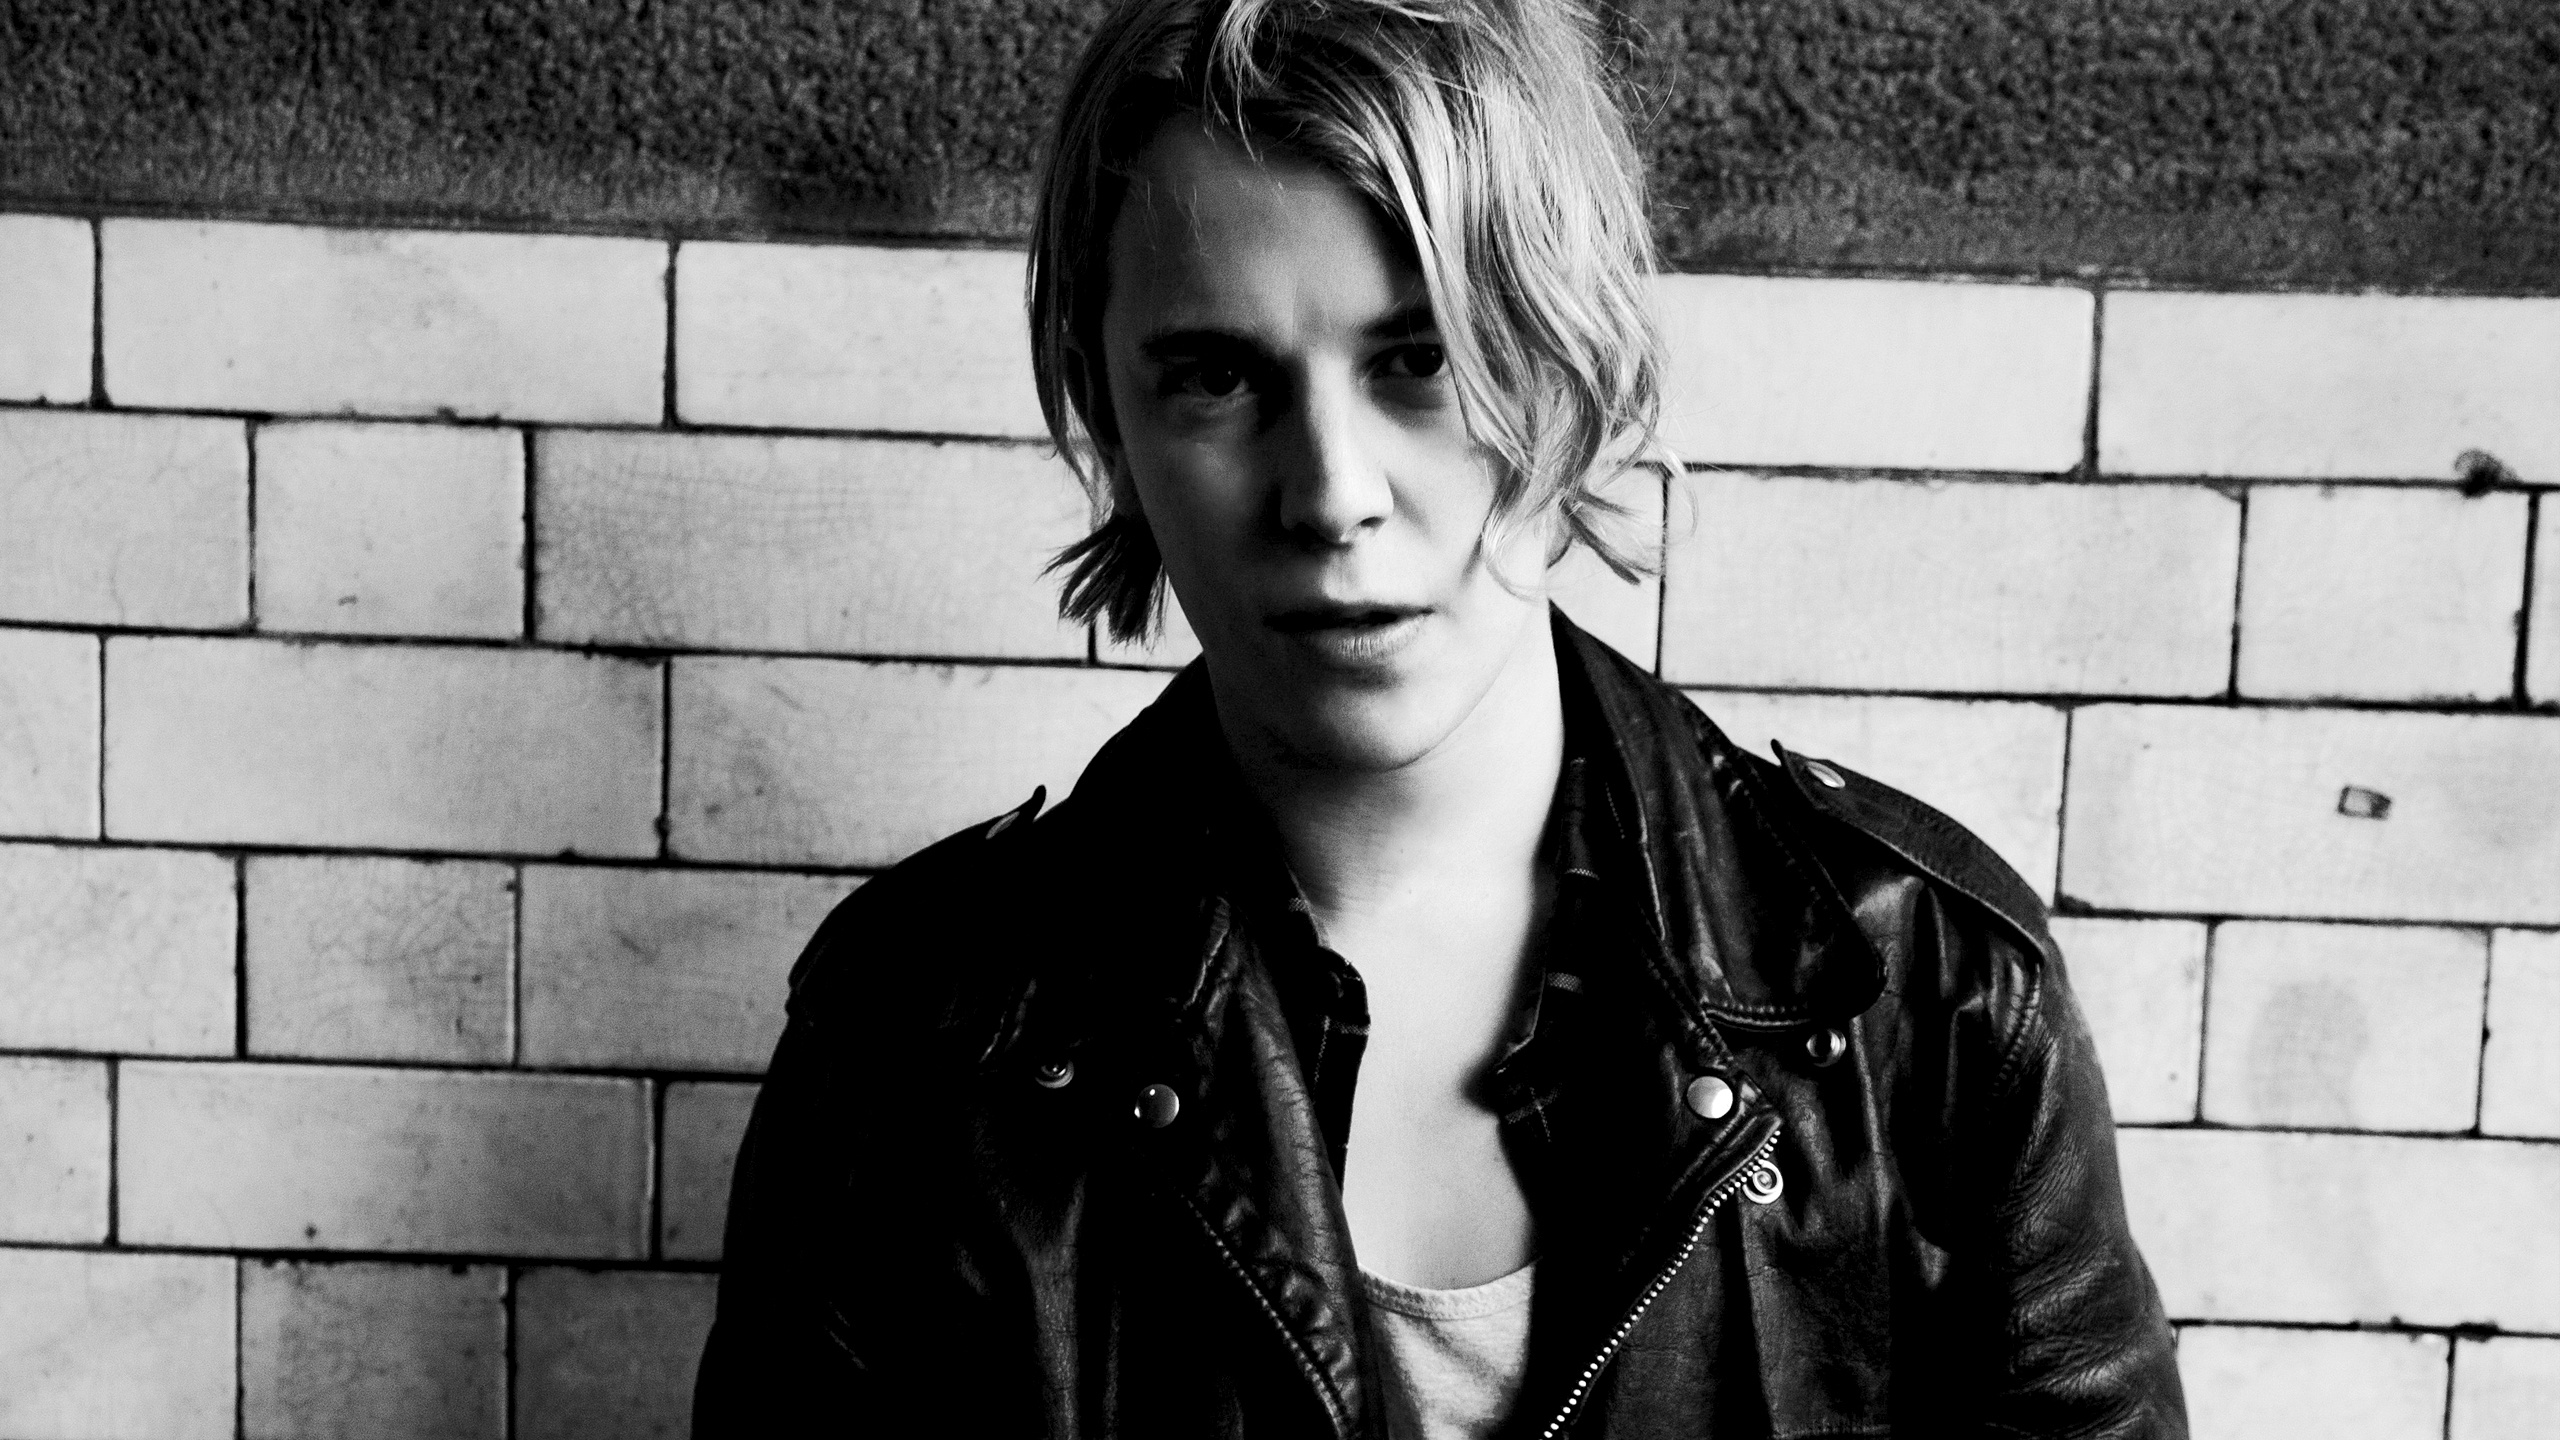 Tom Odell's music, HD wallpapers, Artistic compositions, Music lover's paradise, 2560x1440 HD Desktop